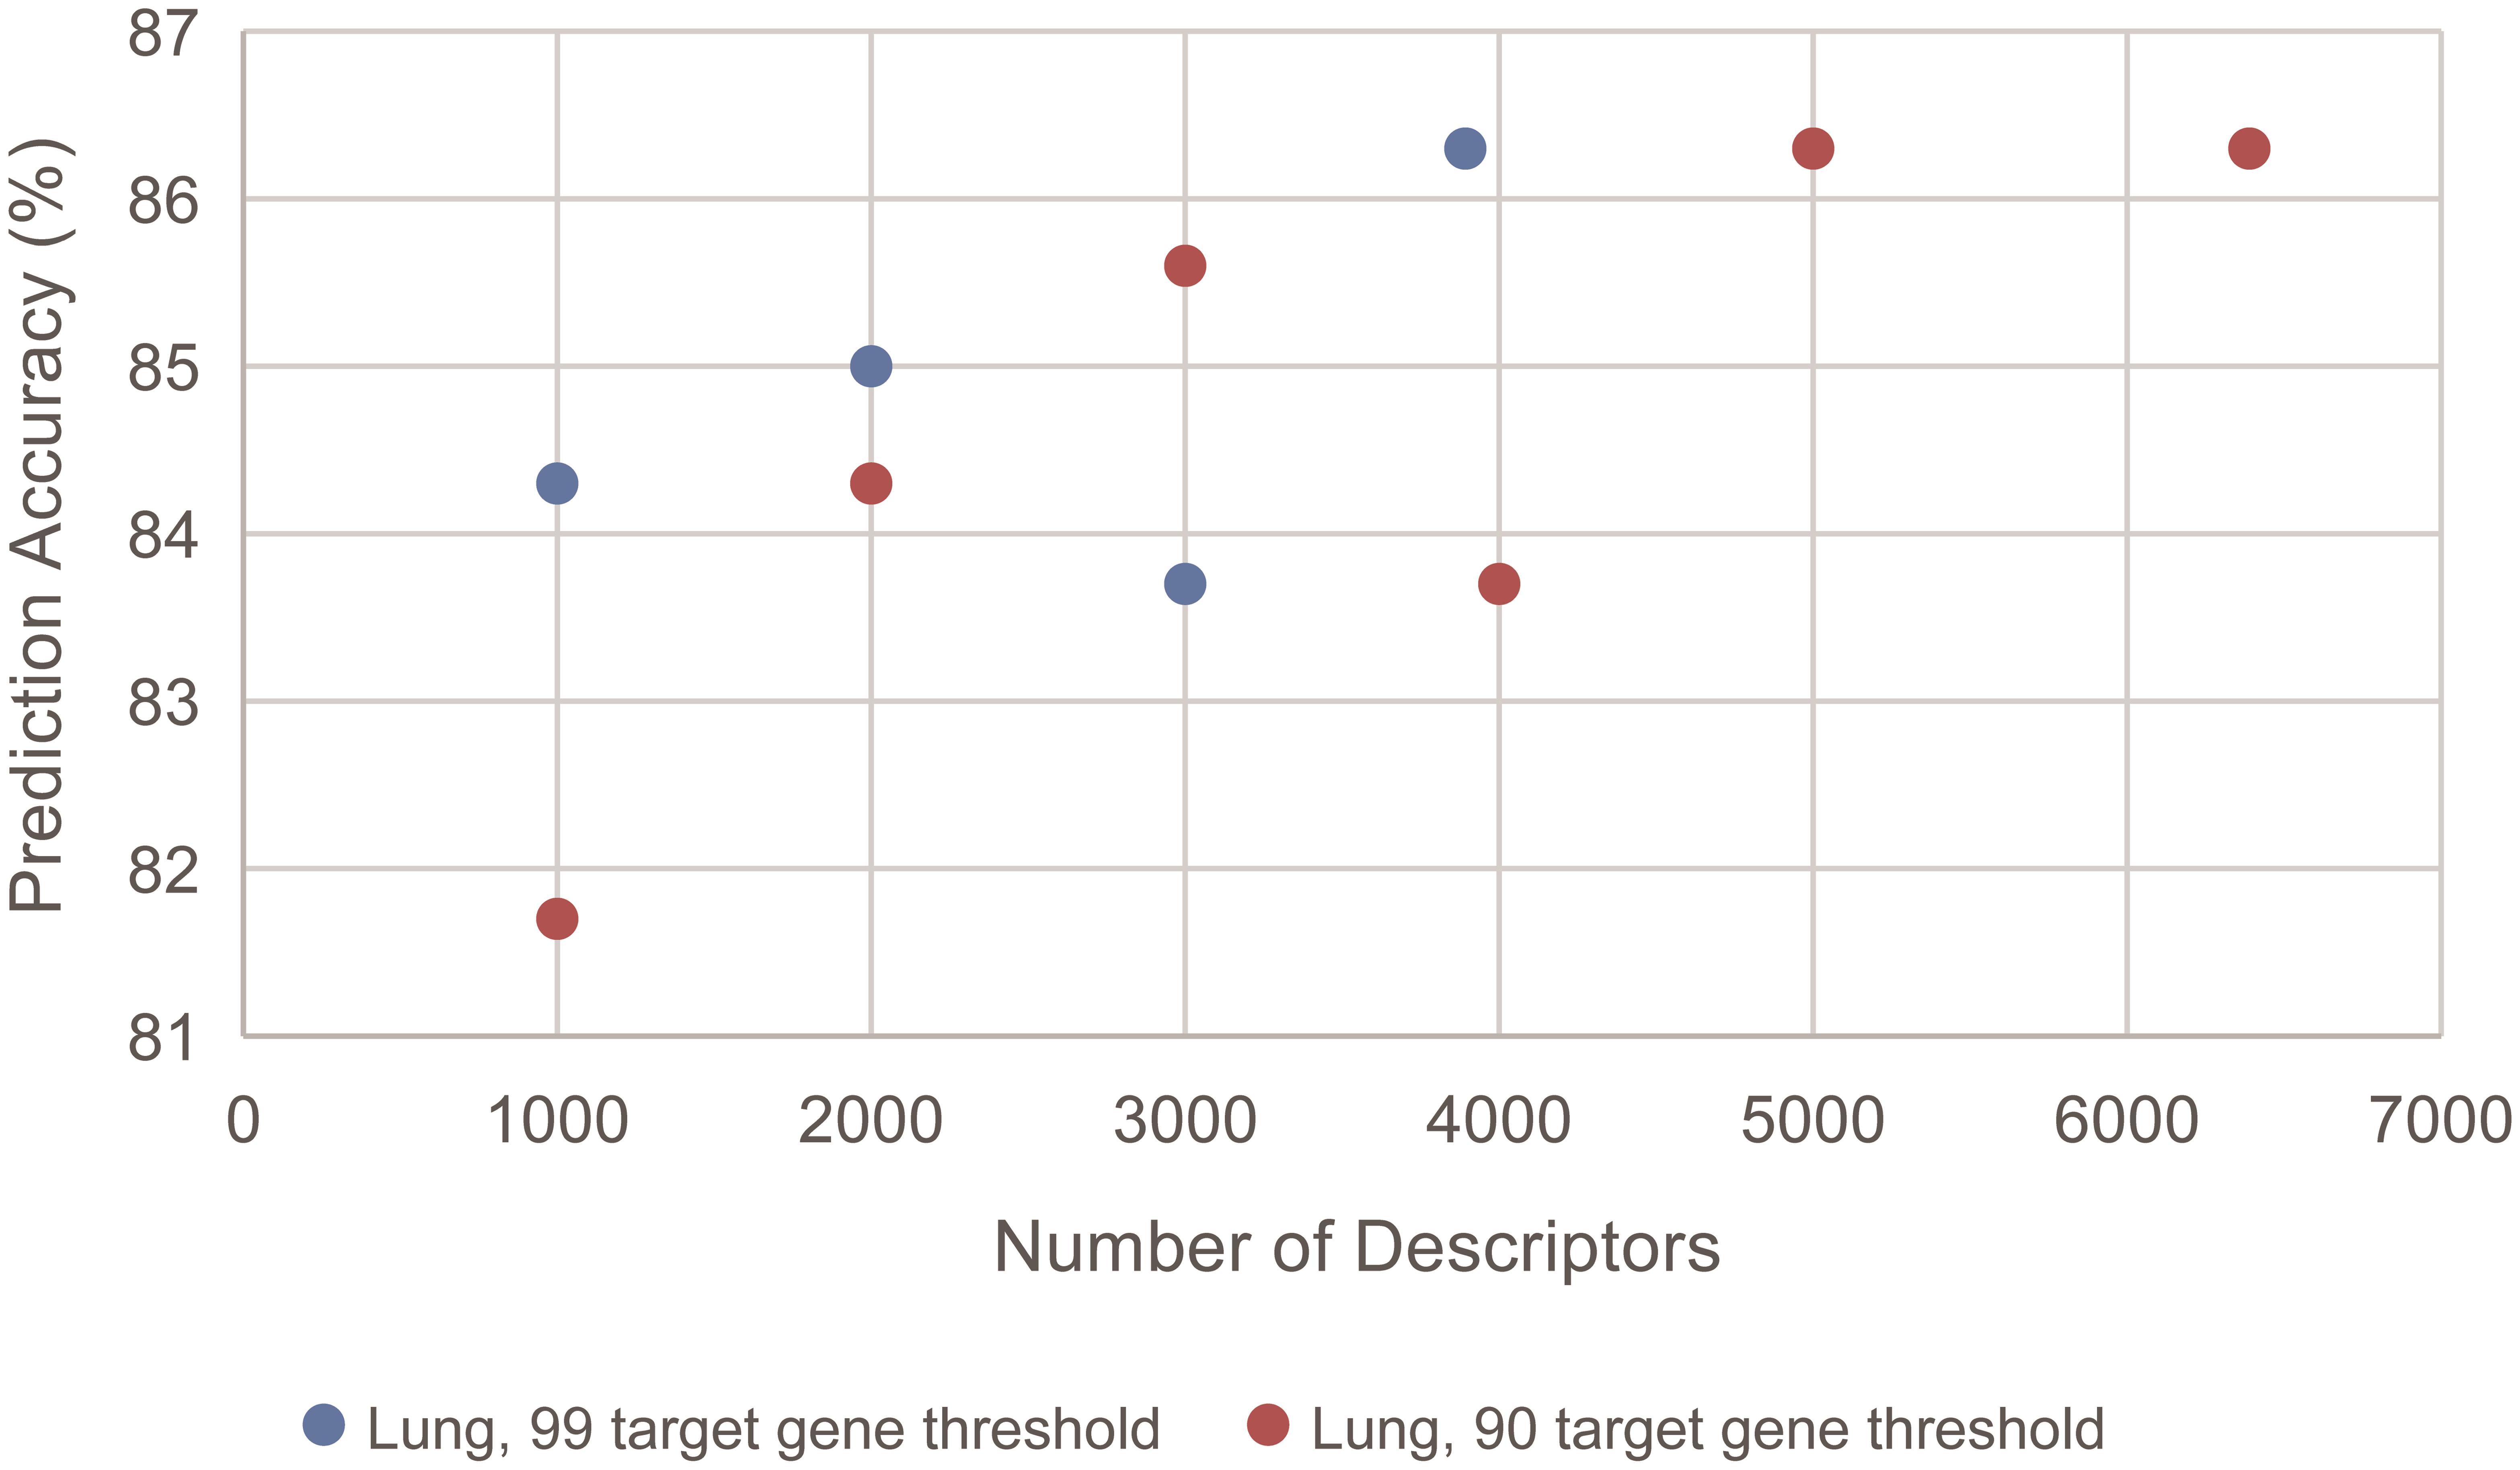 Comparison of the prediction accuracy for the lung cancer model with different numbers of descriptors.